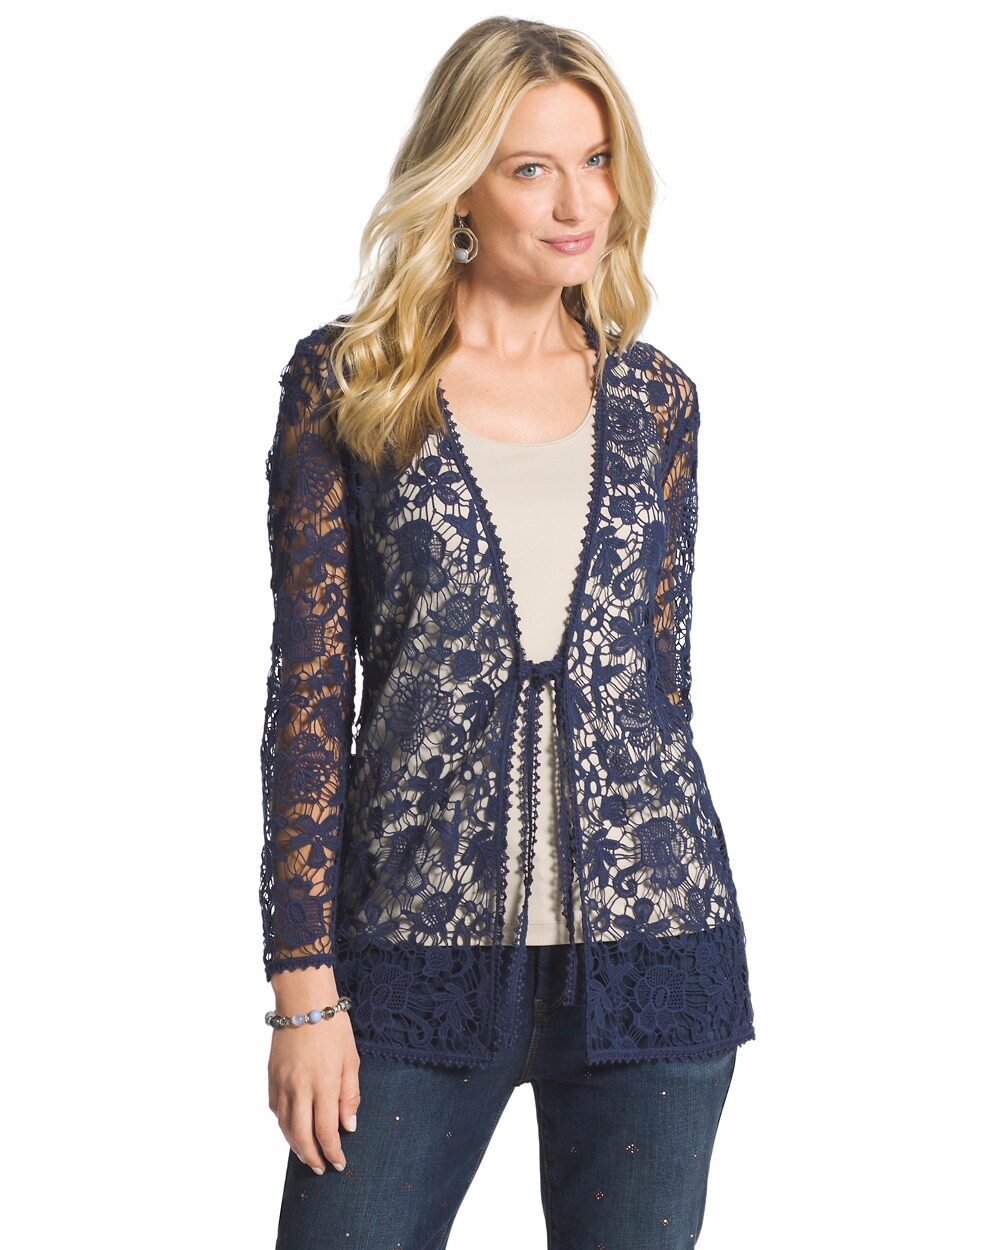 Crocheted Lace Jacket - Chico's